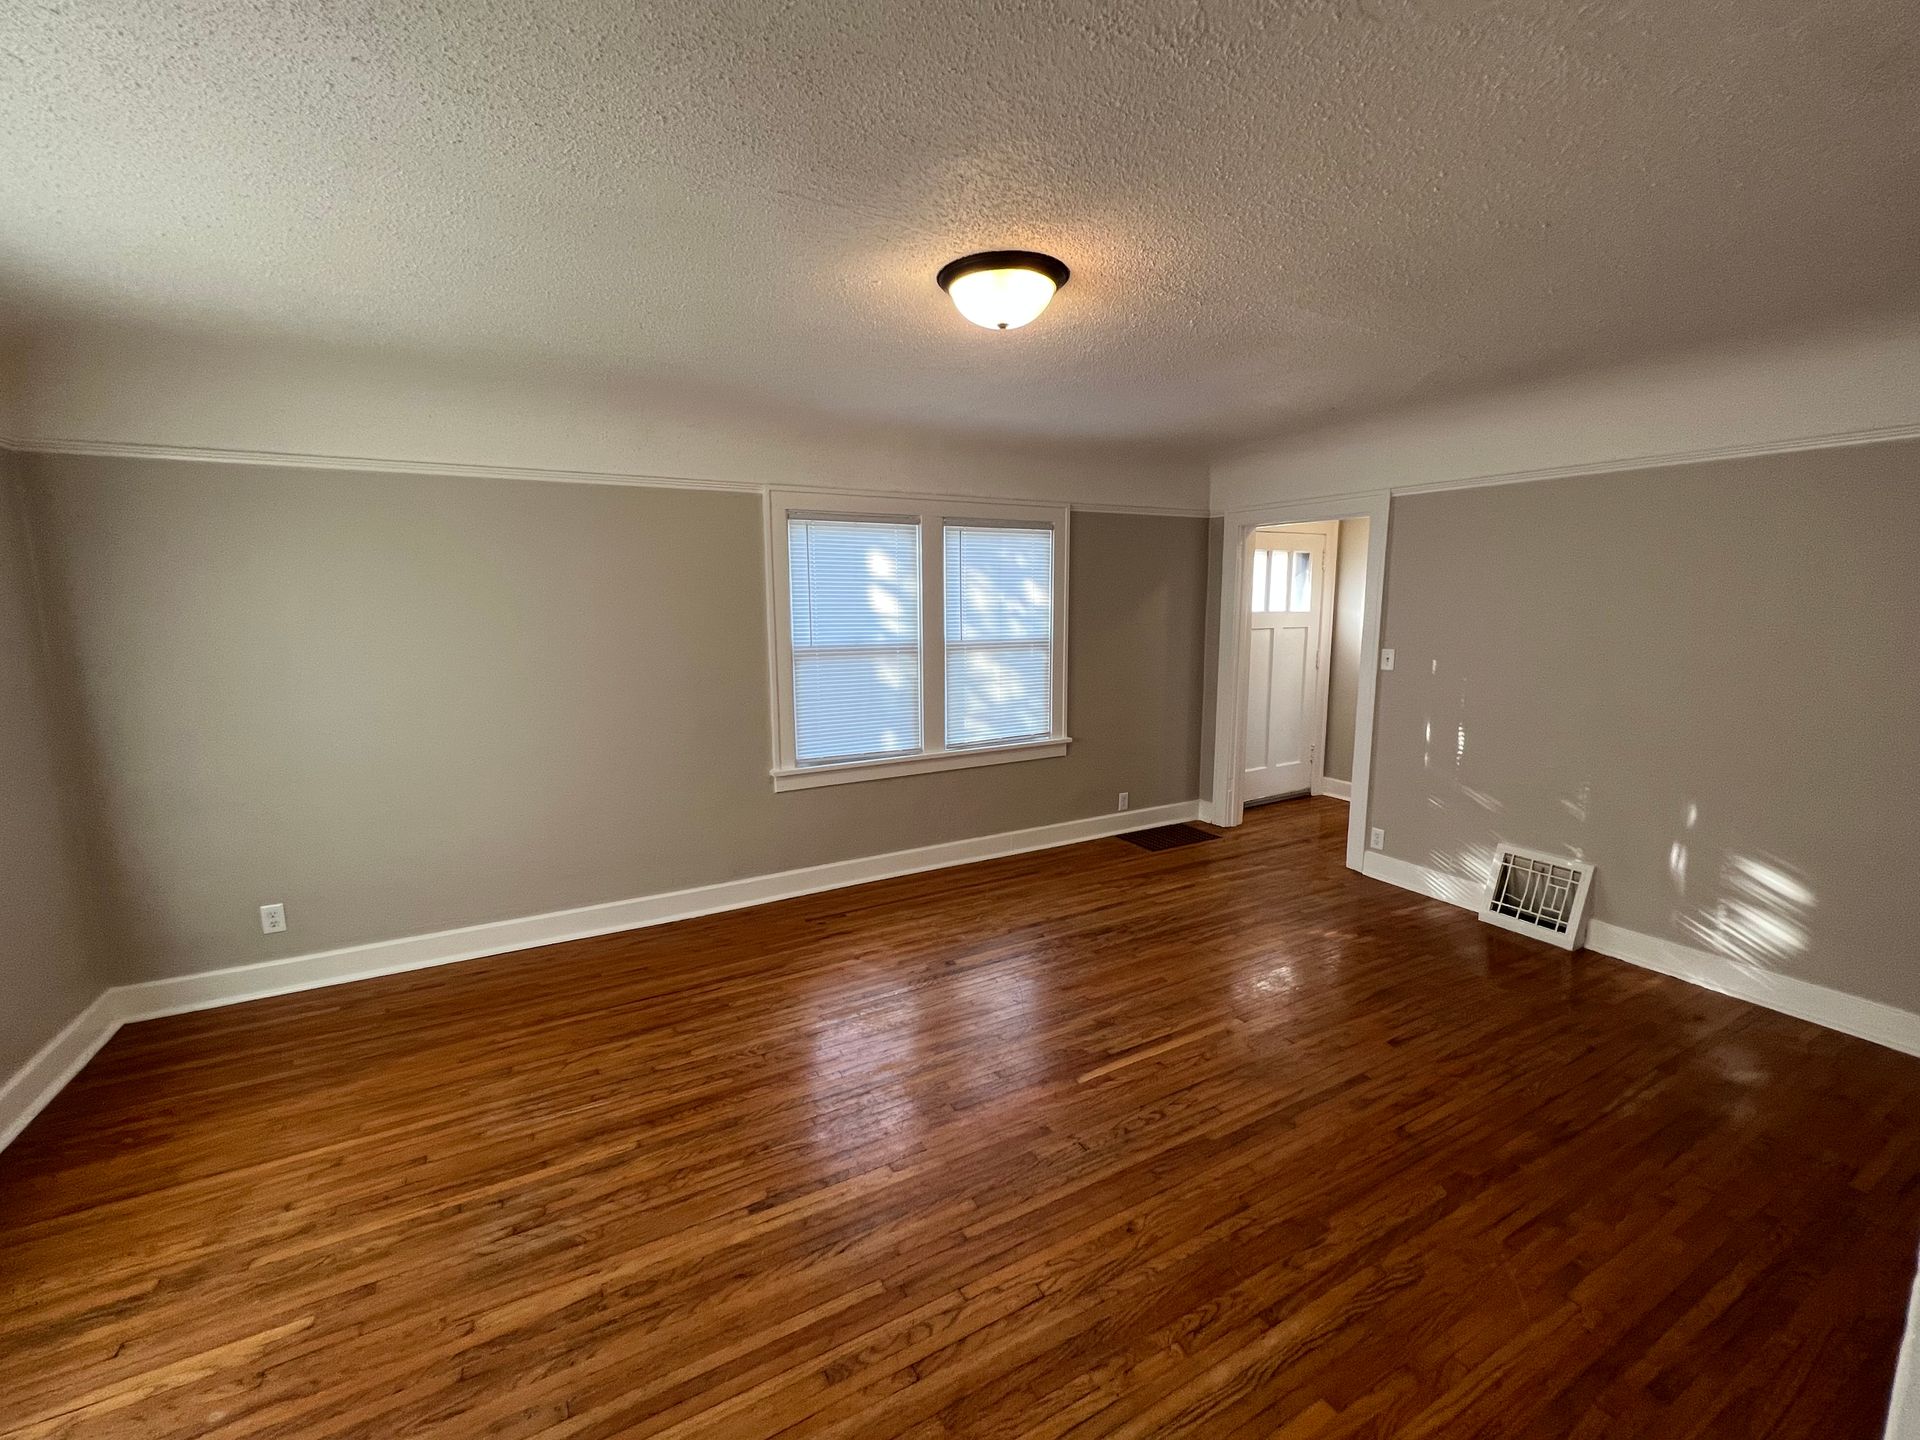 An empty living room with hardwood floors and two windows.